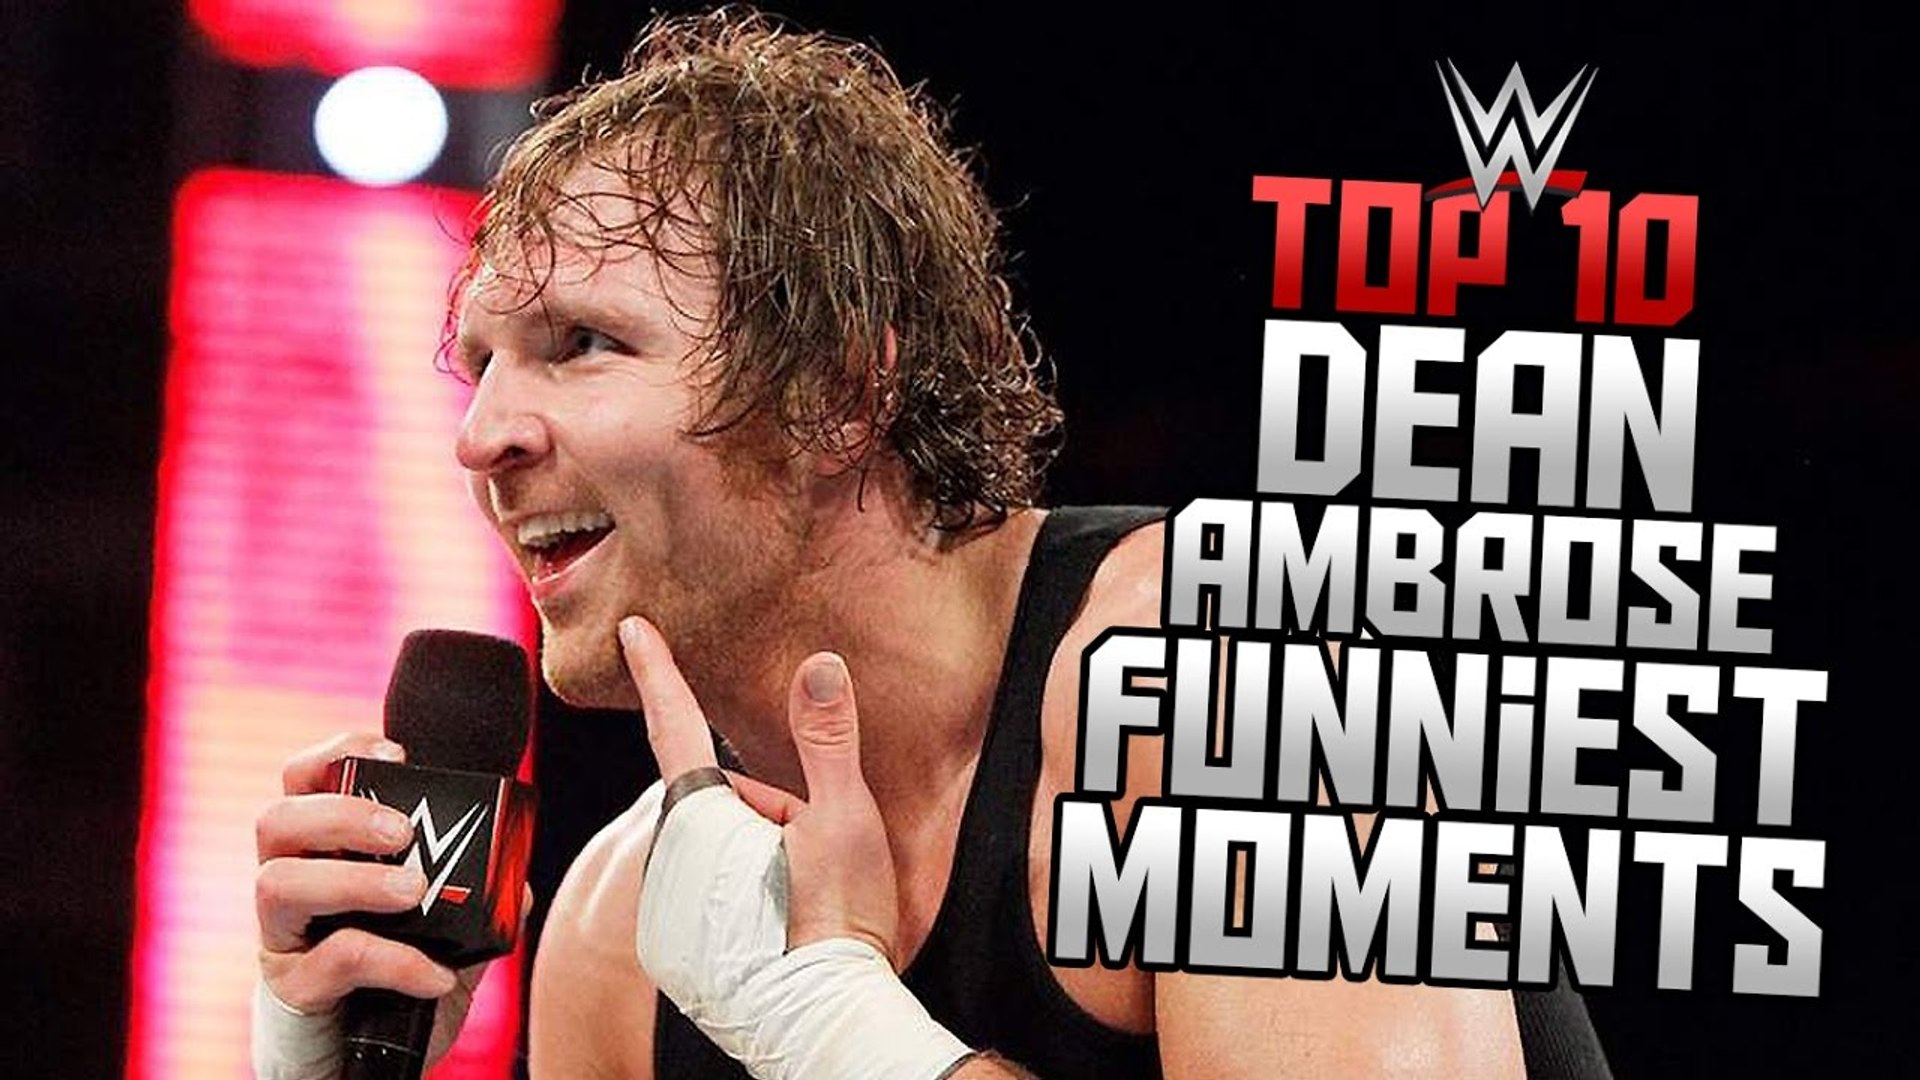 WWE Top 10 Dean Ambrose Funniest Moments! - video Dailymotion